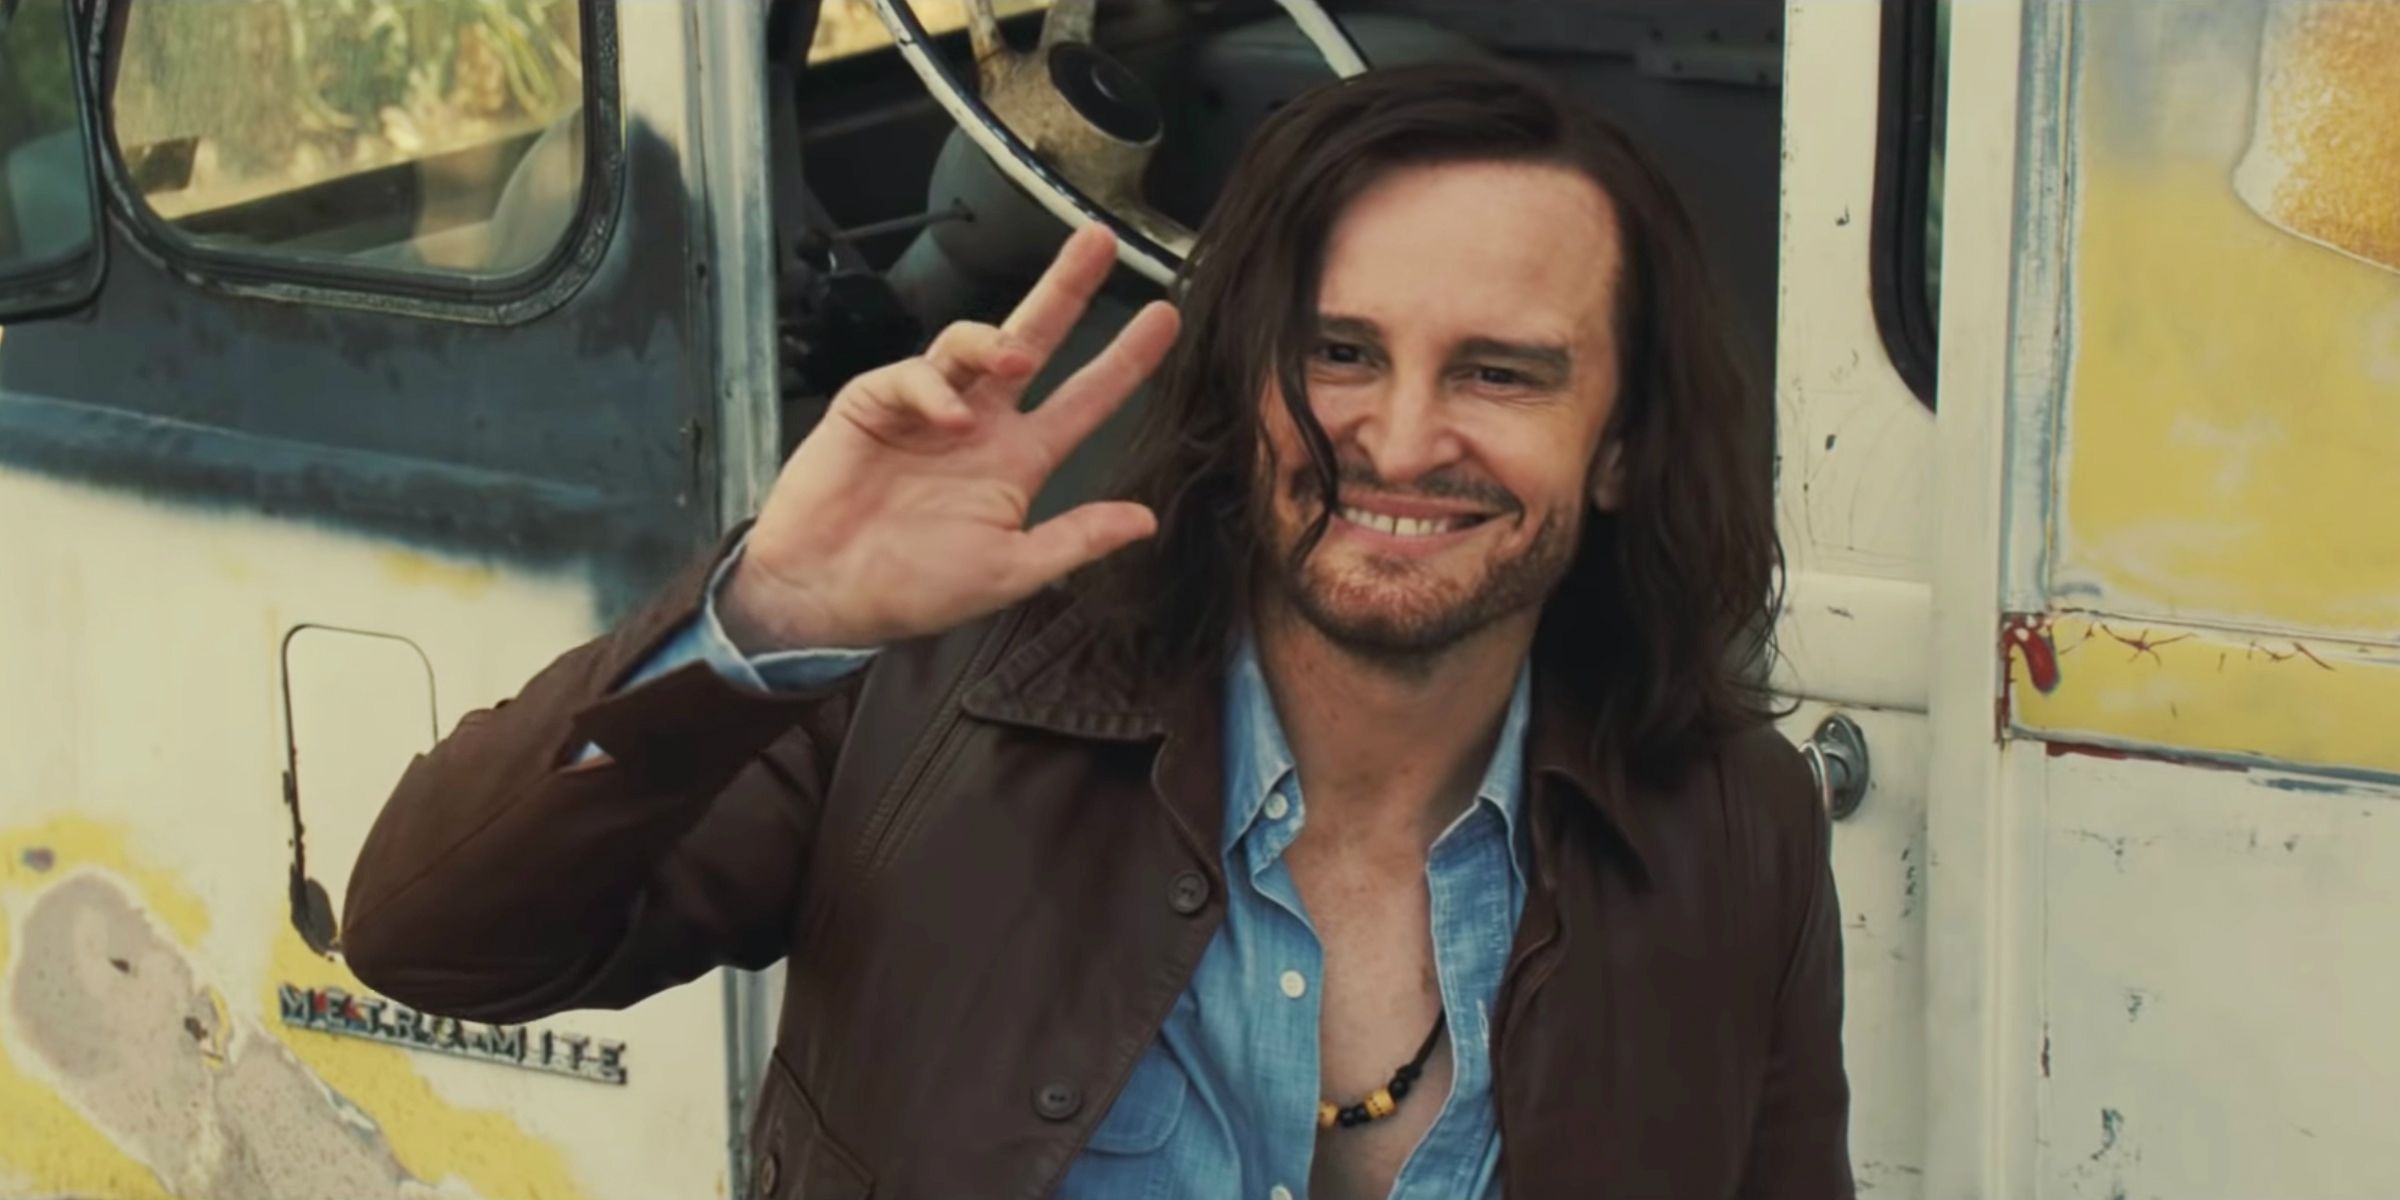 Charles Manson waving in Once Upon a Time in Hollywood